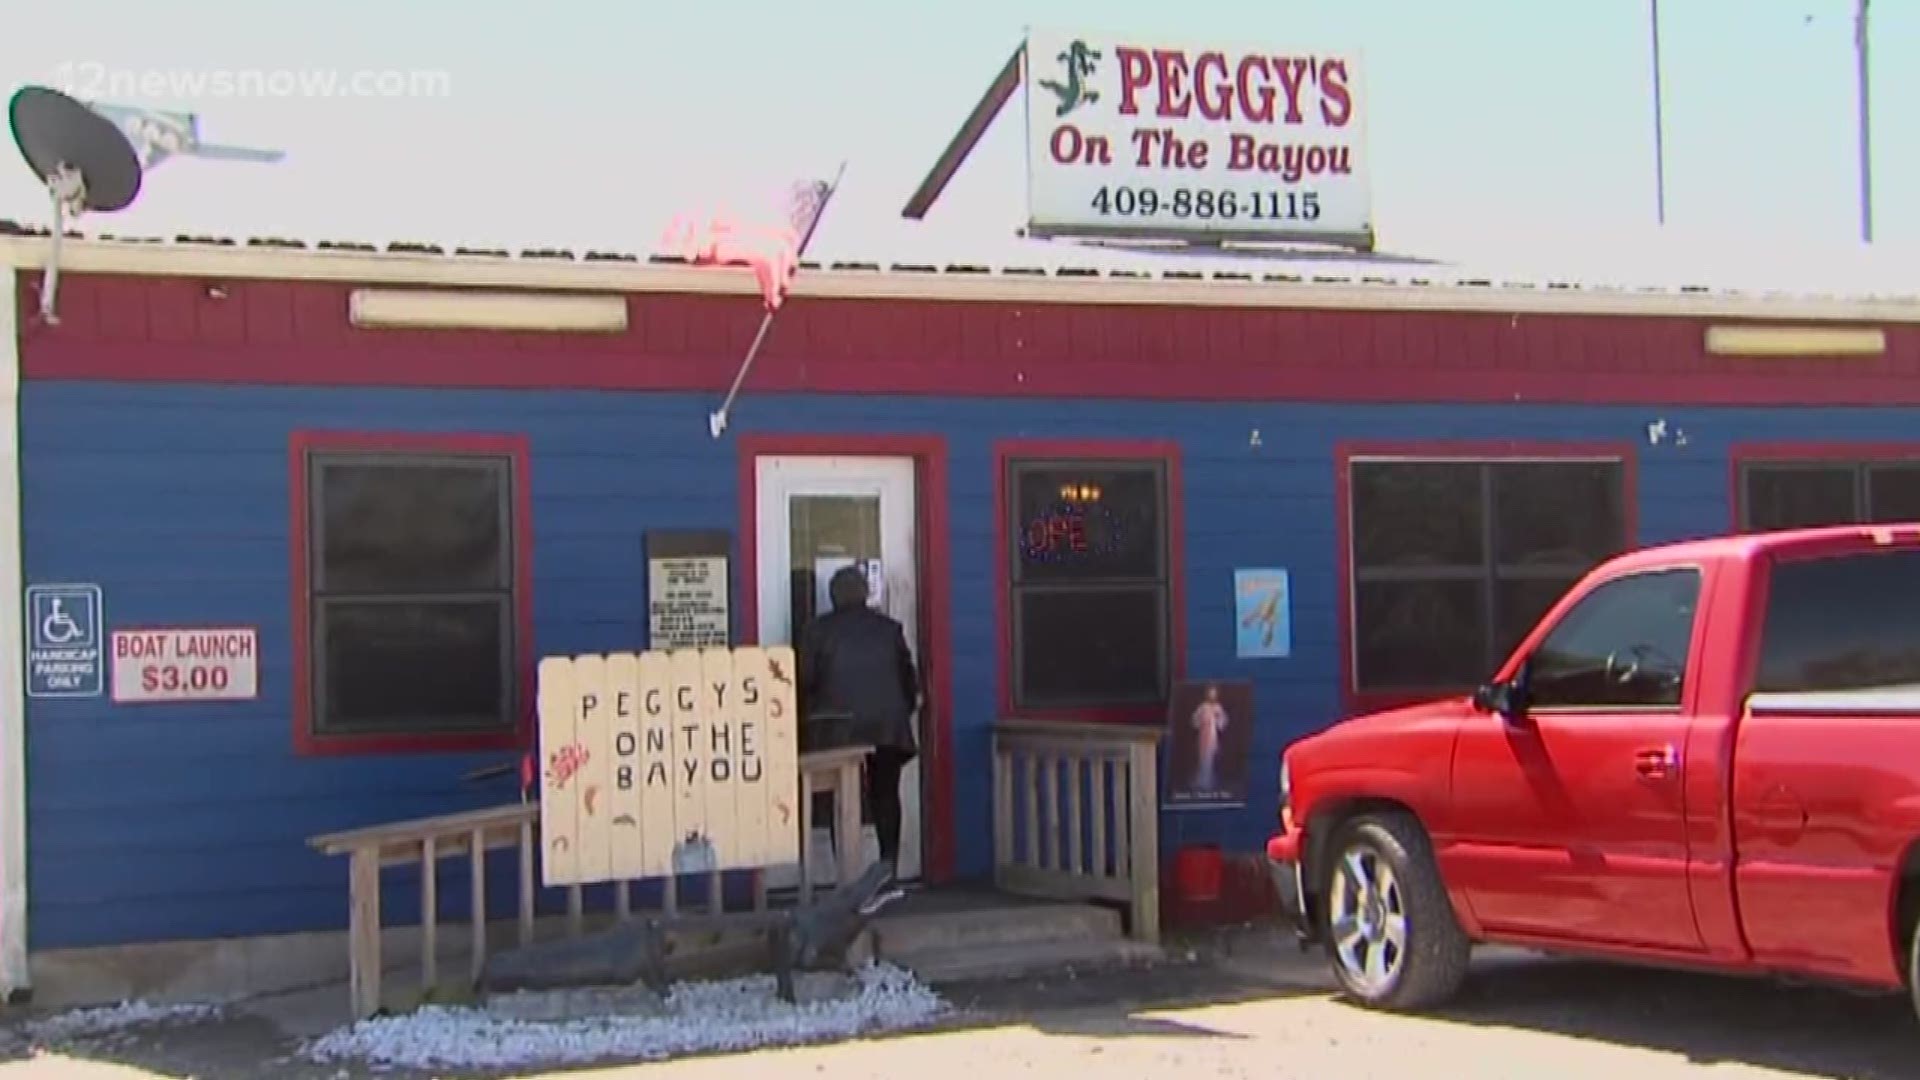 Located right on the edge of the bridge, 'Peggy's on the Bayou' has had a hard time keeping their doors open over the past three years.